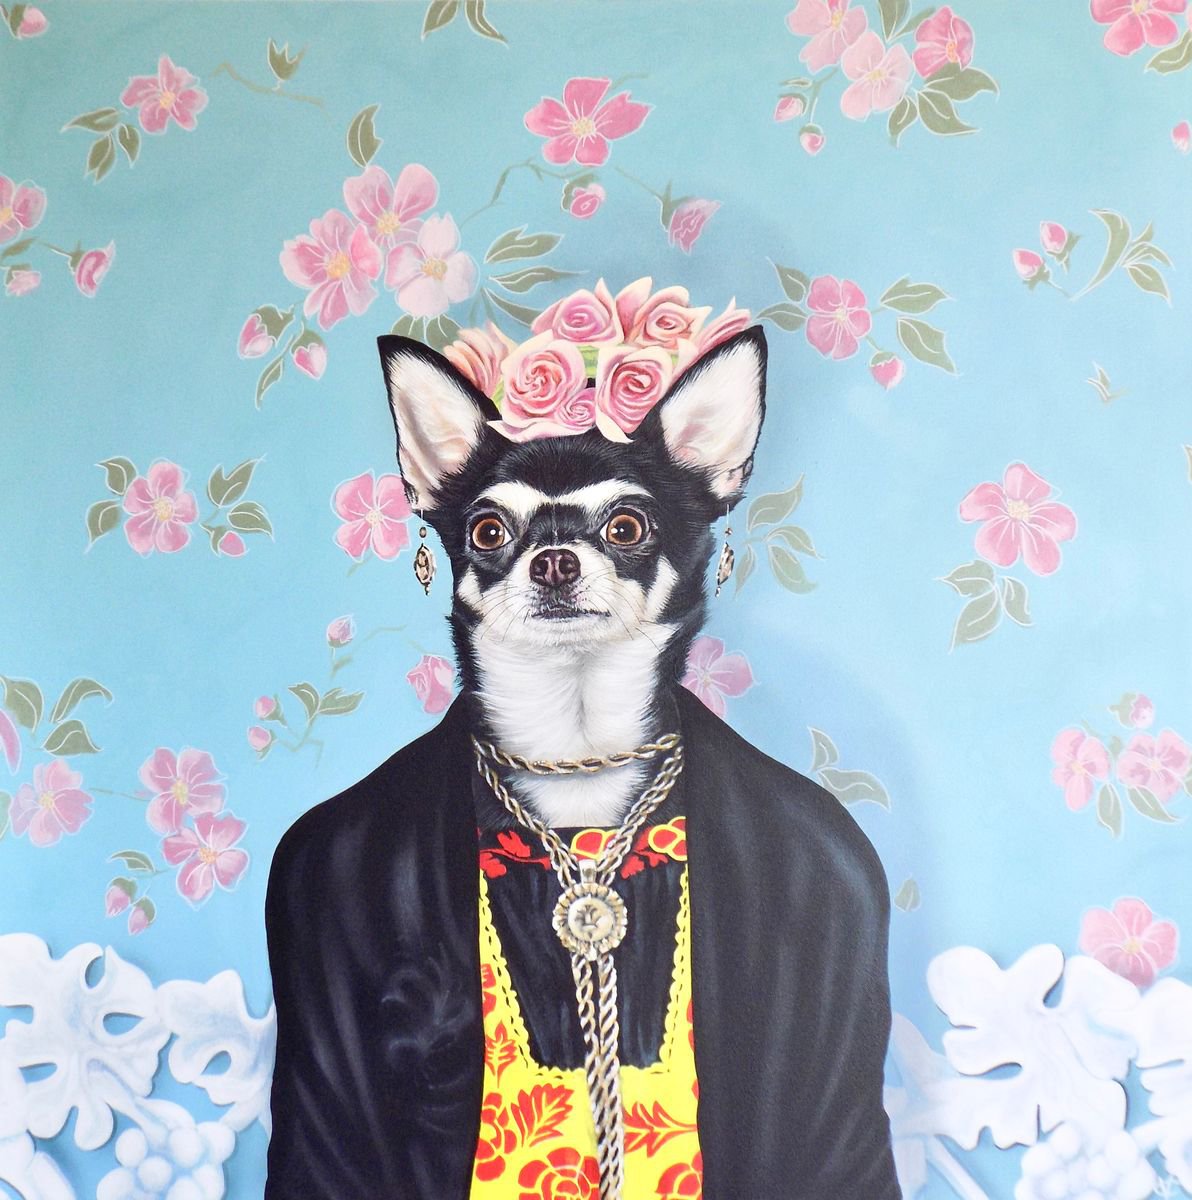 Frida Kahlo inspired dog painting as yet untitled by Victoria Coleman